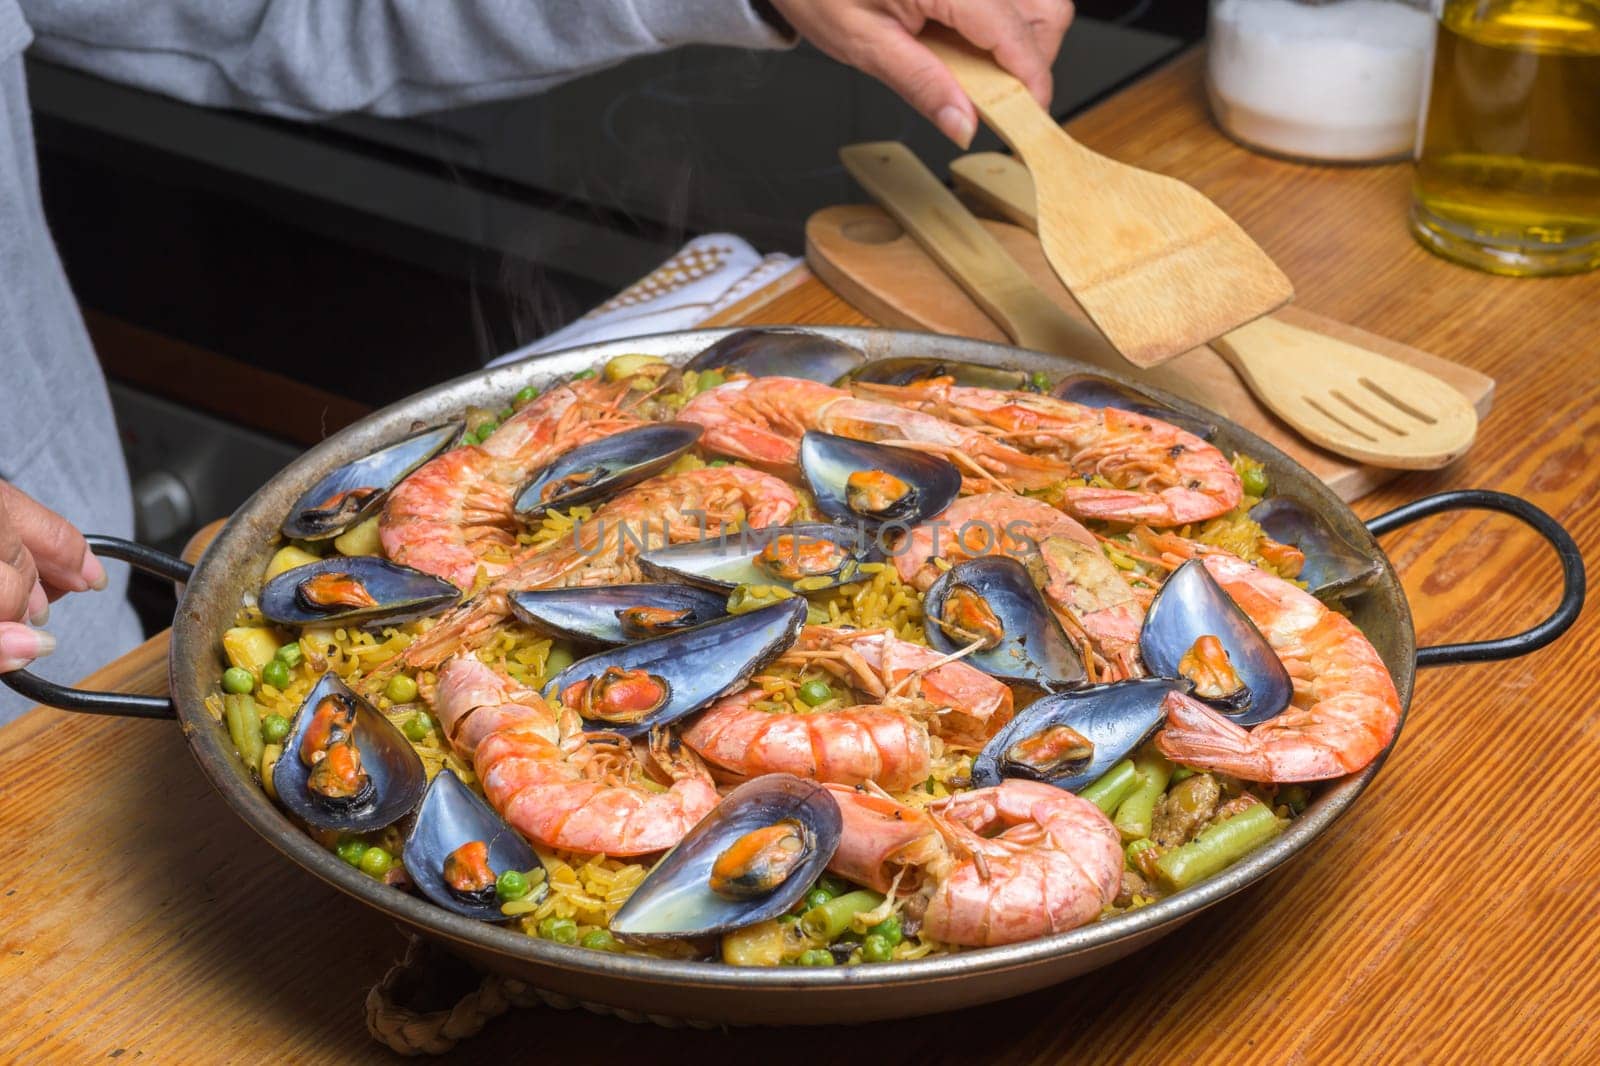 A traditional Spanish paella with shrimp and mussels in a rustic kitchen setup, typical Spanish cuisine, Majorca, Balearic Islands, Spain by carlosviv